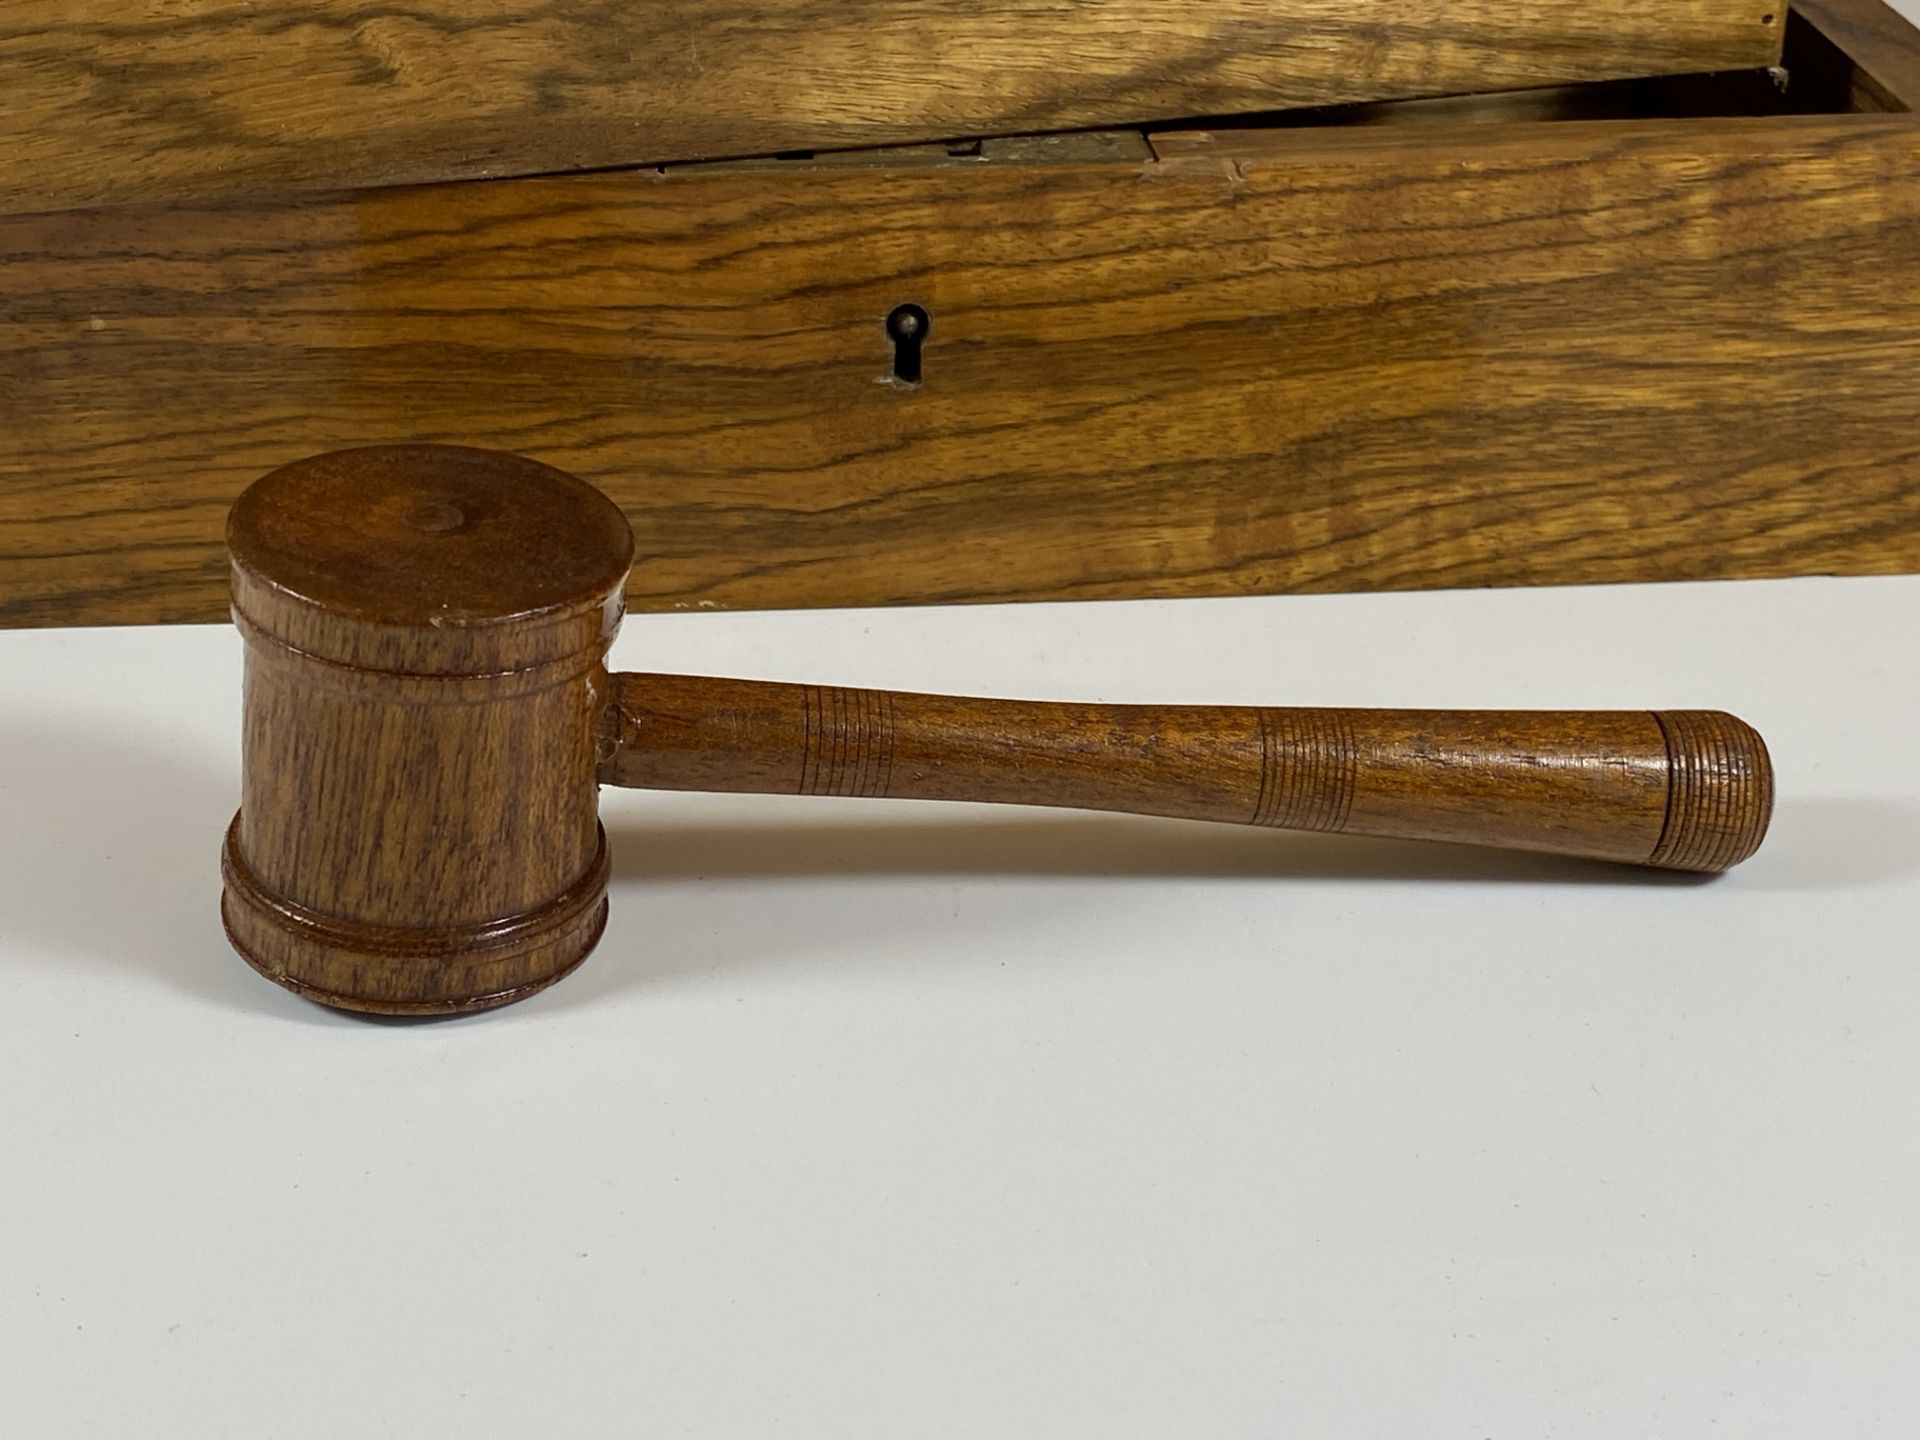 TWO ITEMS - A VINTAGE OAK BOX WITH INNER PULL OUT CUTLERY DRAWER AND A HARDWOOD AUCTIONEER'S GAVEL - Image 3 of 3